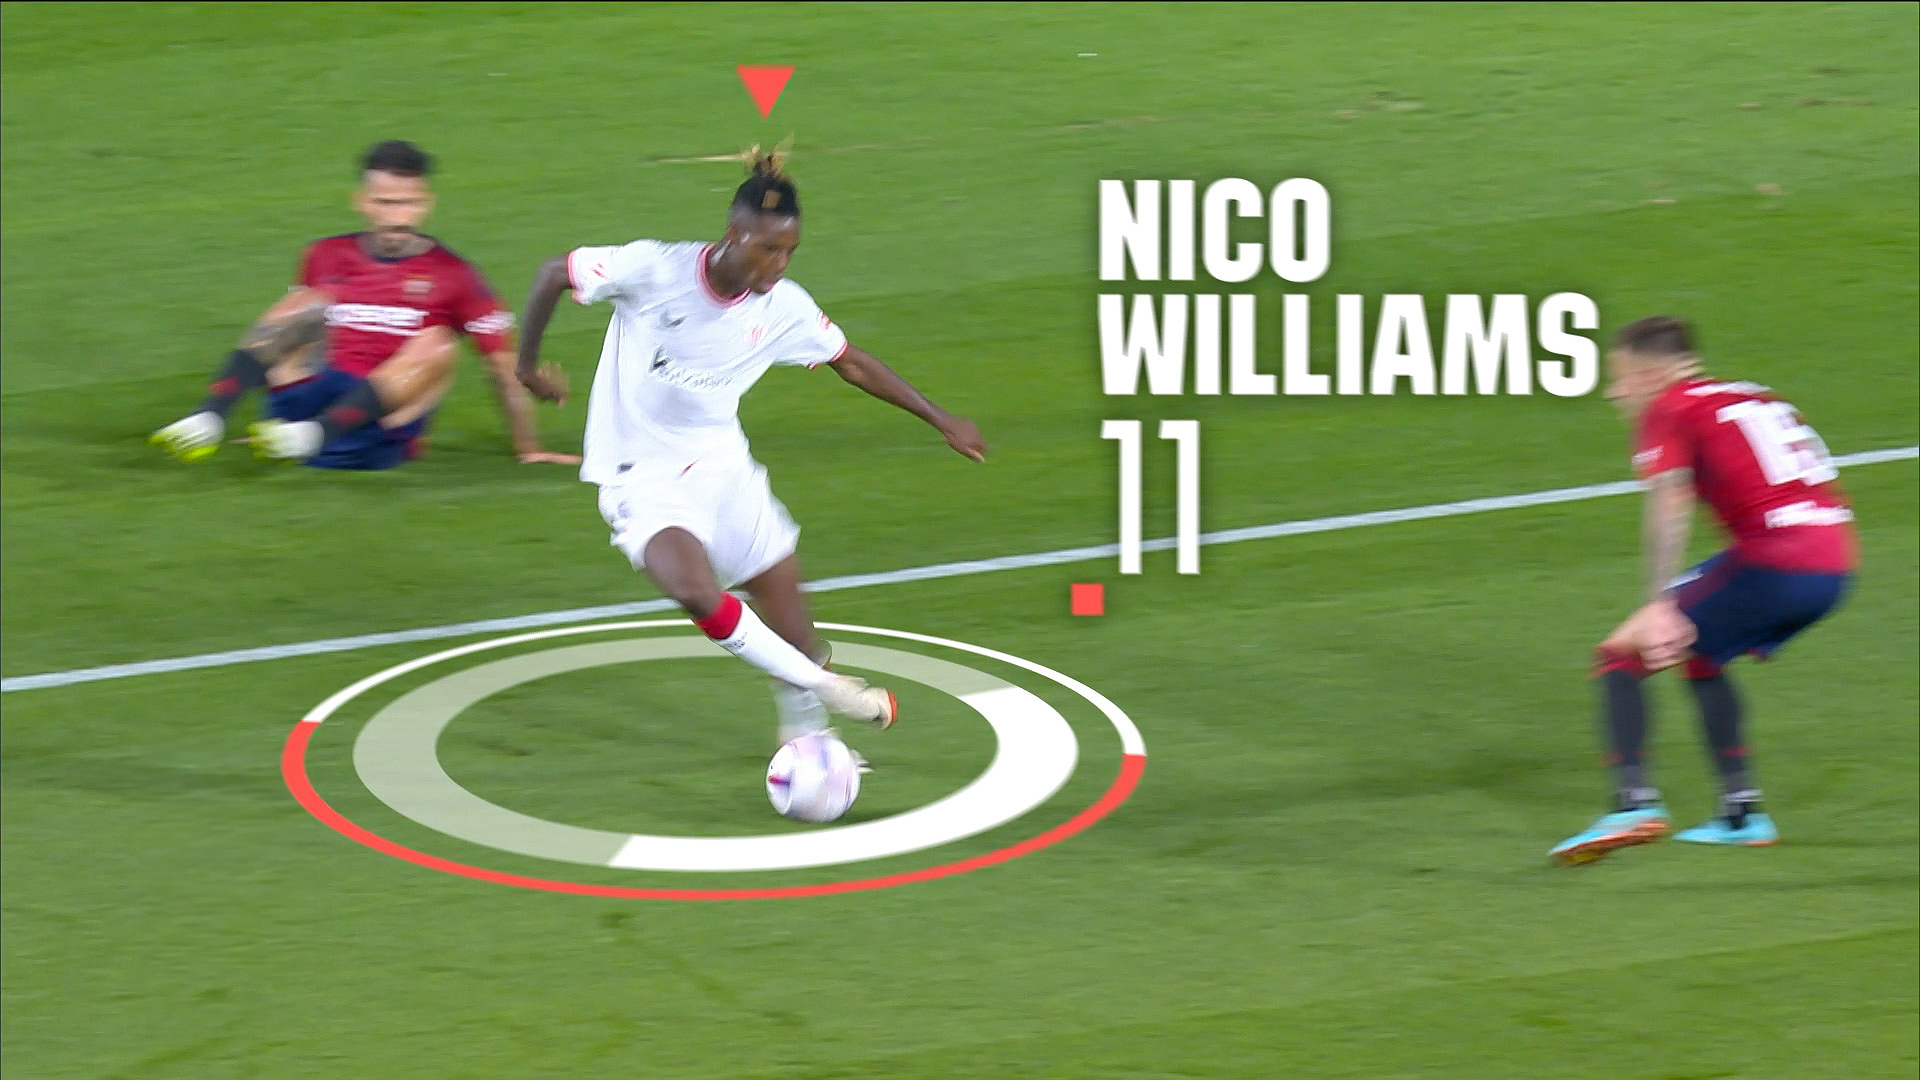 Nico williams in action on a soccer field.